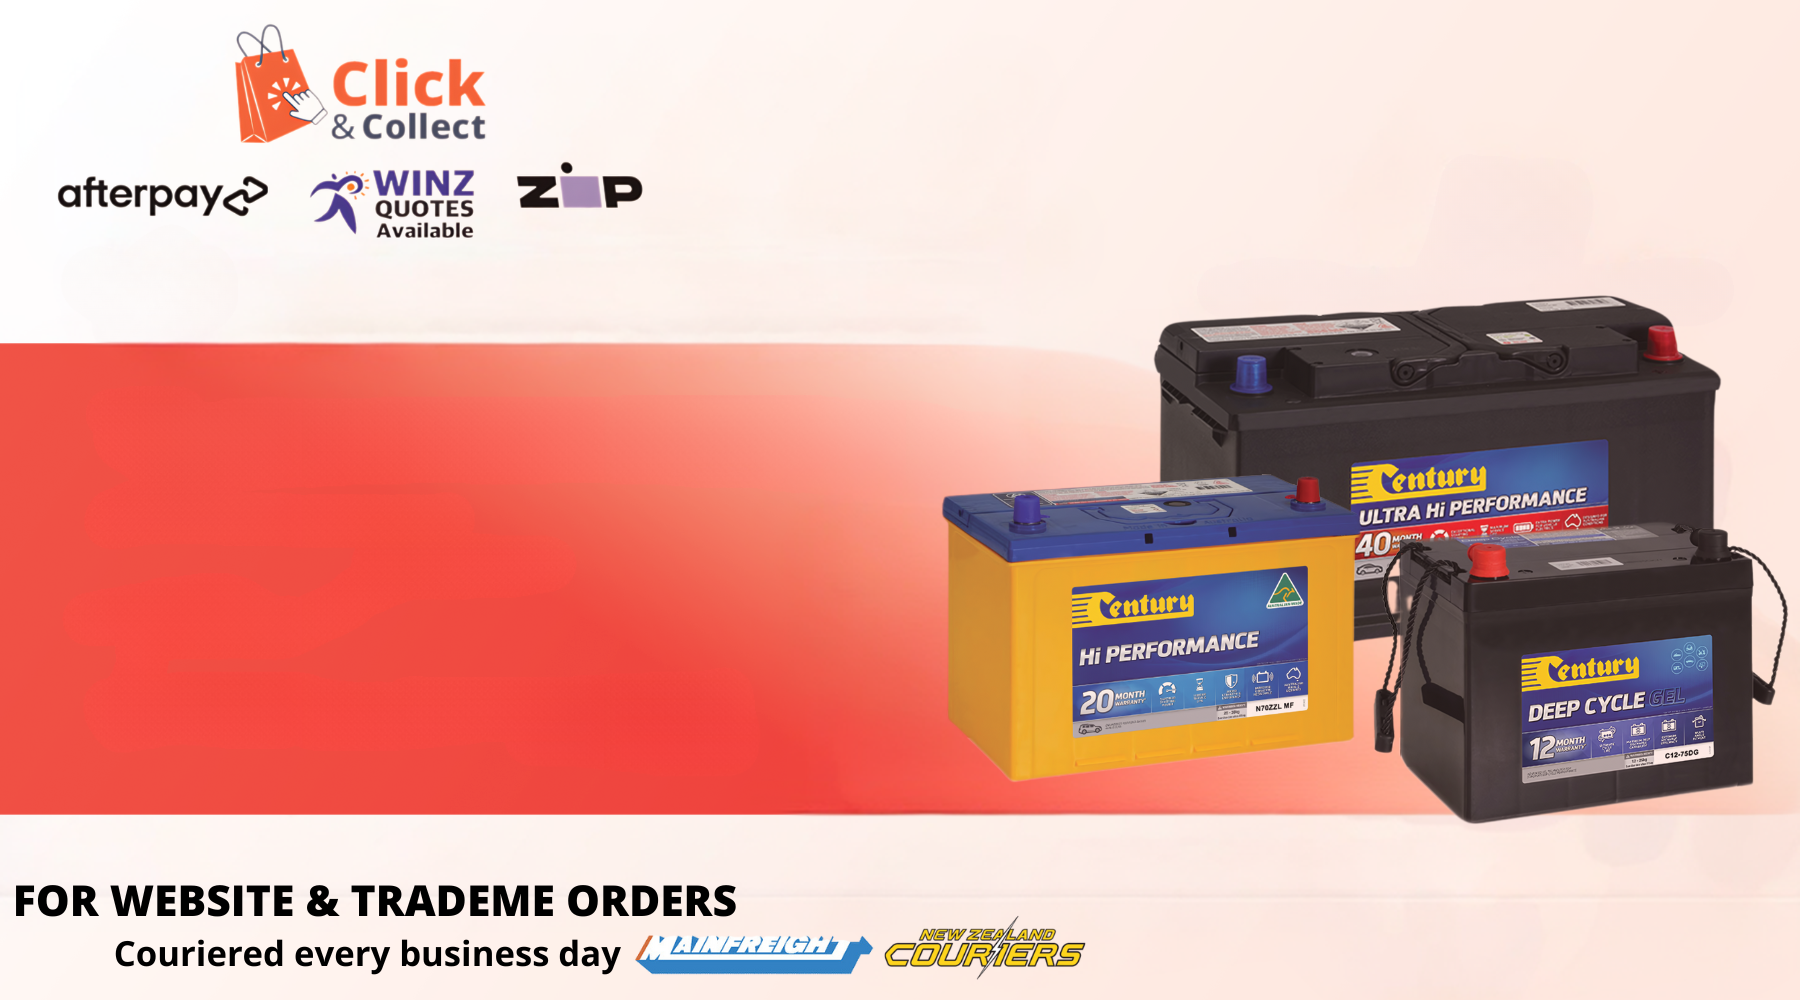 Car batteries for website and trademe orders, including Century Hi Performance and Deep Cycle gel batteries, available for click and collect, Afterpay, Winz quotes, and Zip payment options.